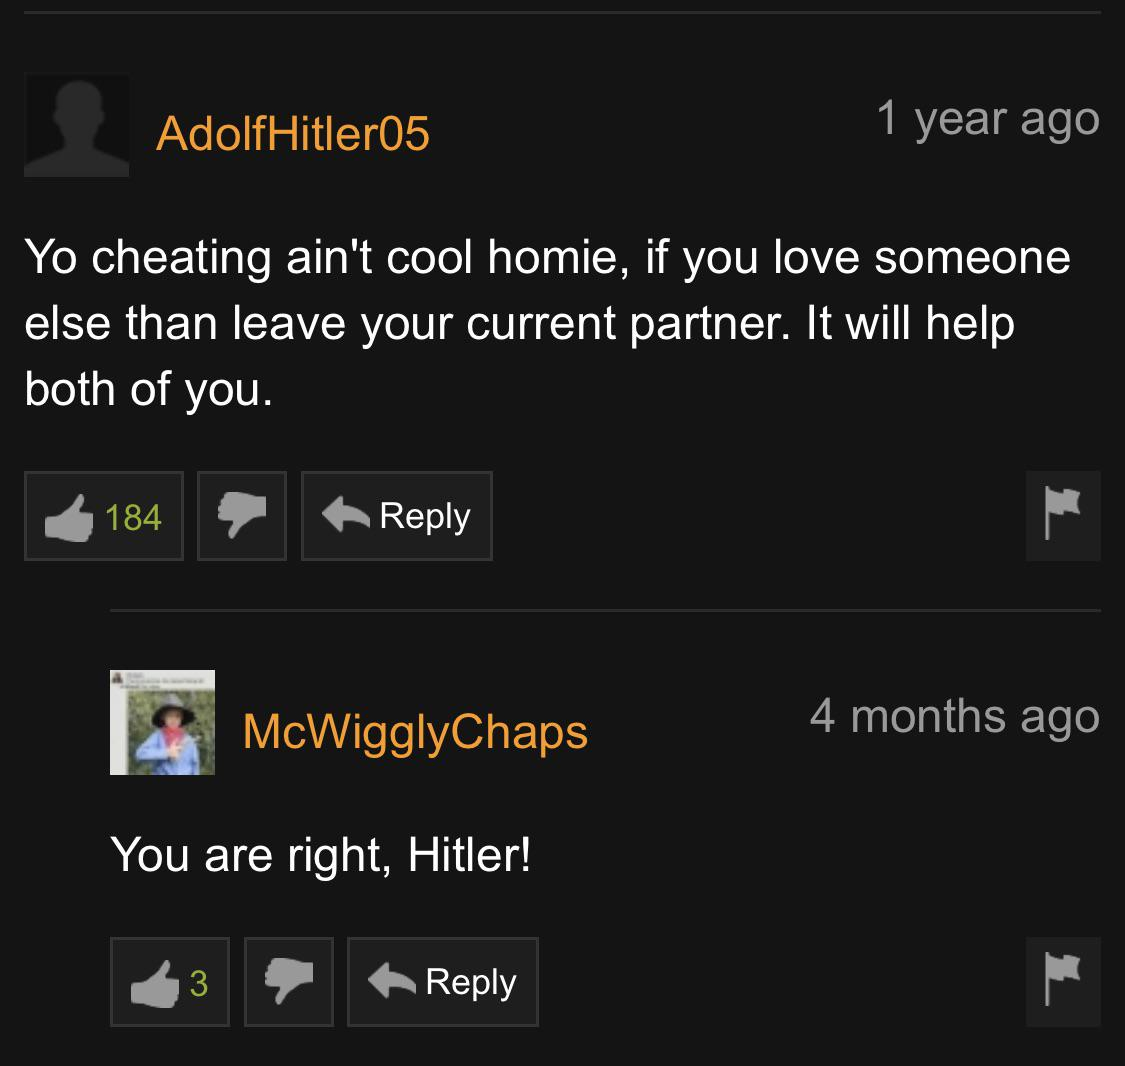 pornhub - screenshot - AdolfHitler05 1 year ago Yo cheating ain't cool homie, if you love someone else than leave your current partner. It will help both of you. 3 184 McWigglyChaps 4 months ago You are right, Hitler!